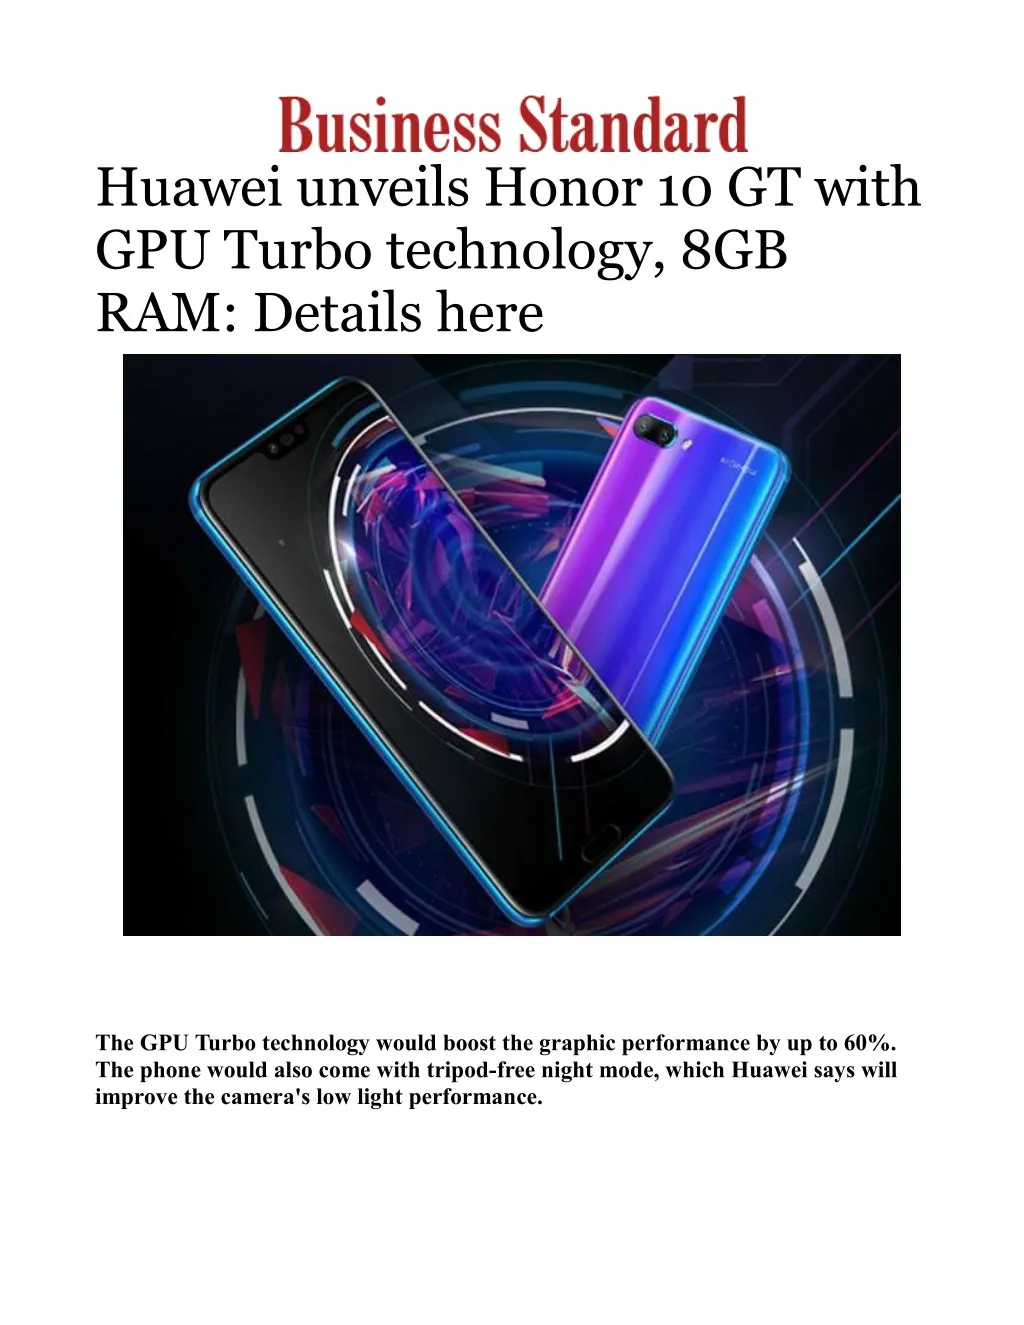 huawei unveils honor 10 gt with gpu turbo